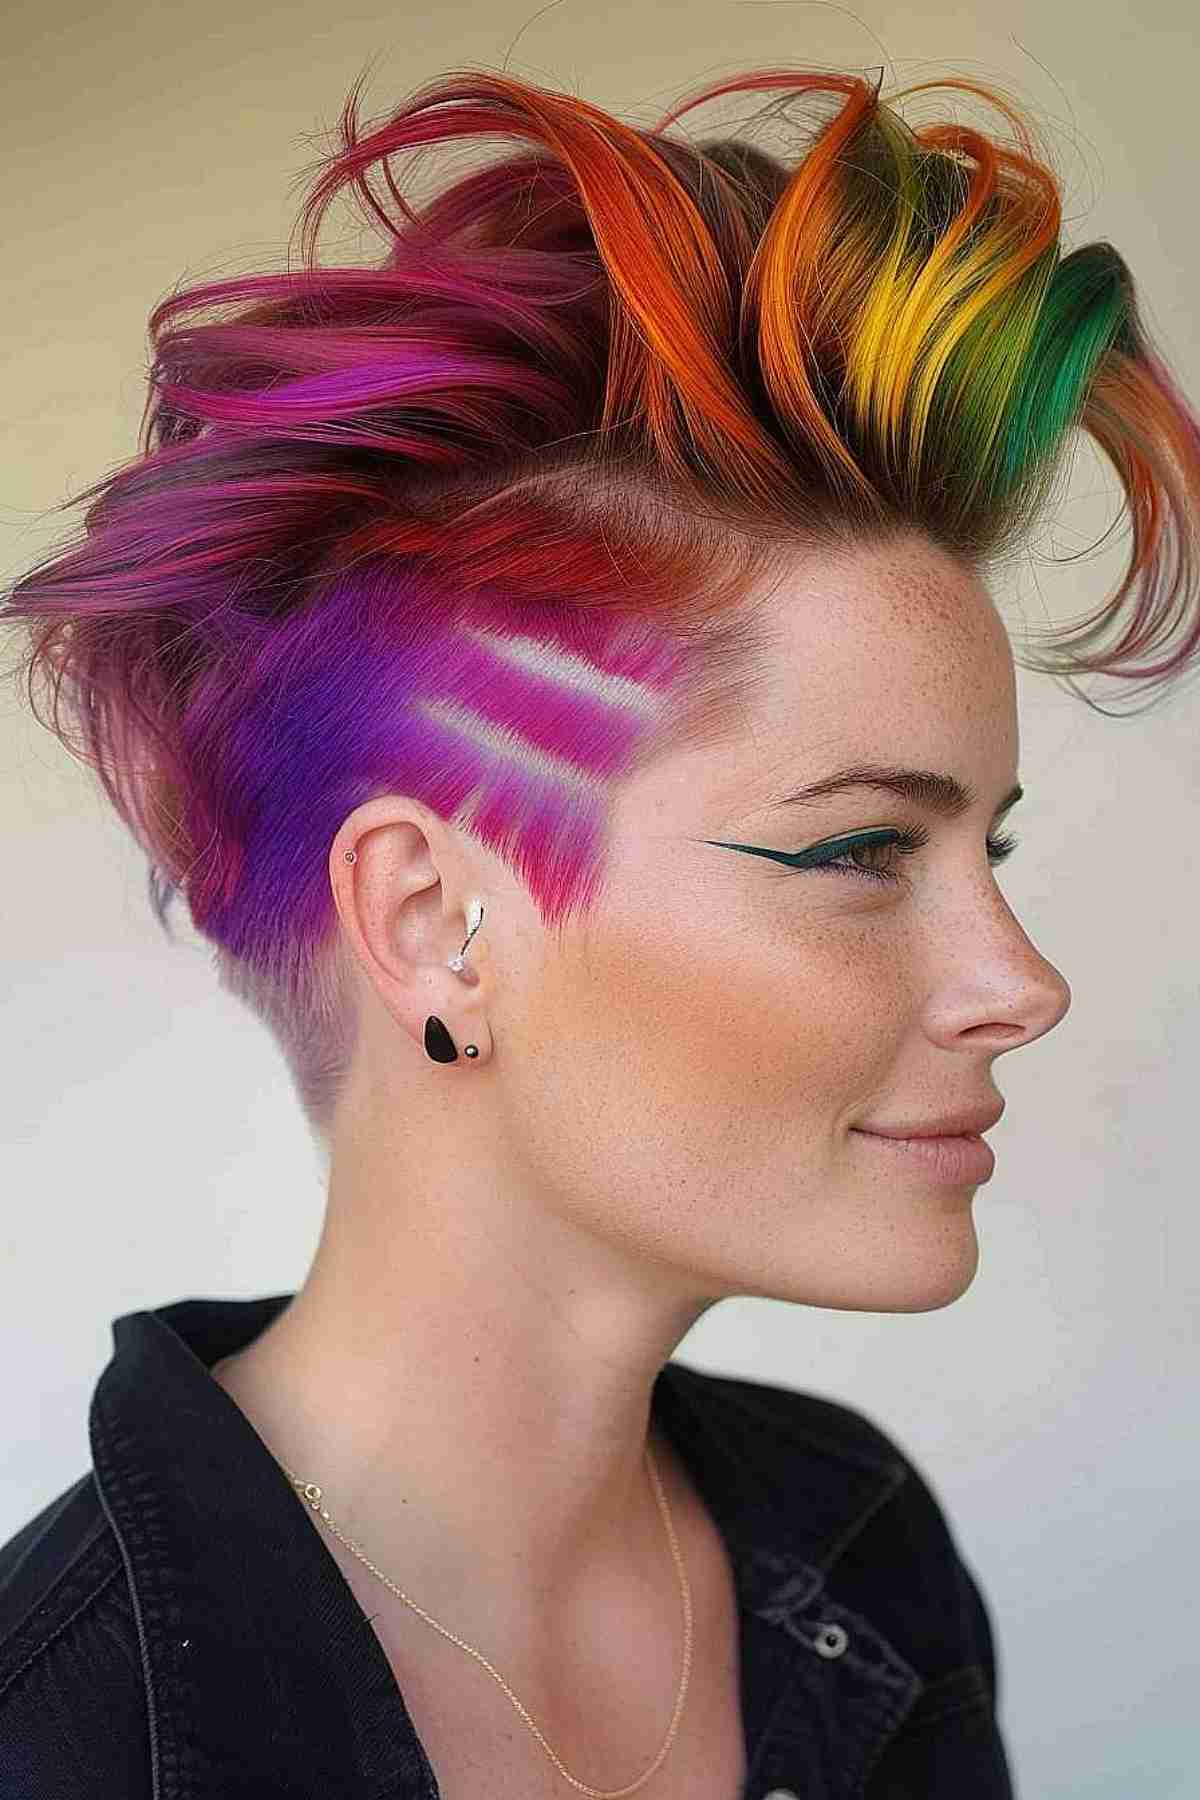 Edgy asymmetrical short haircut with vibrant rainbow colors and creative buzz-cut pattern